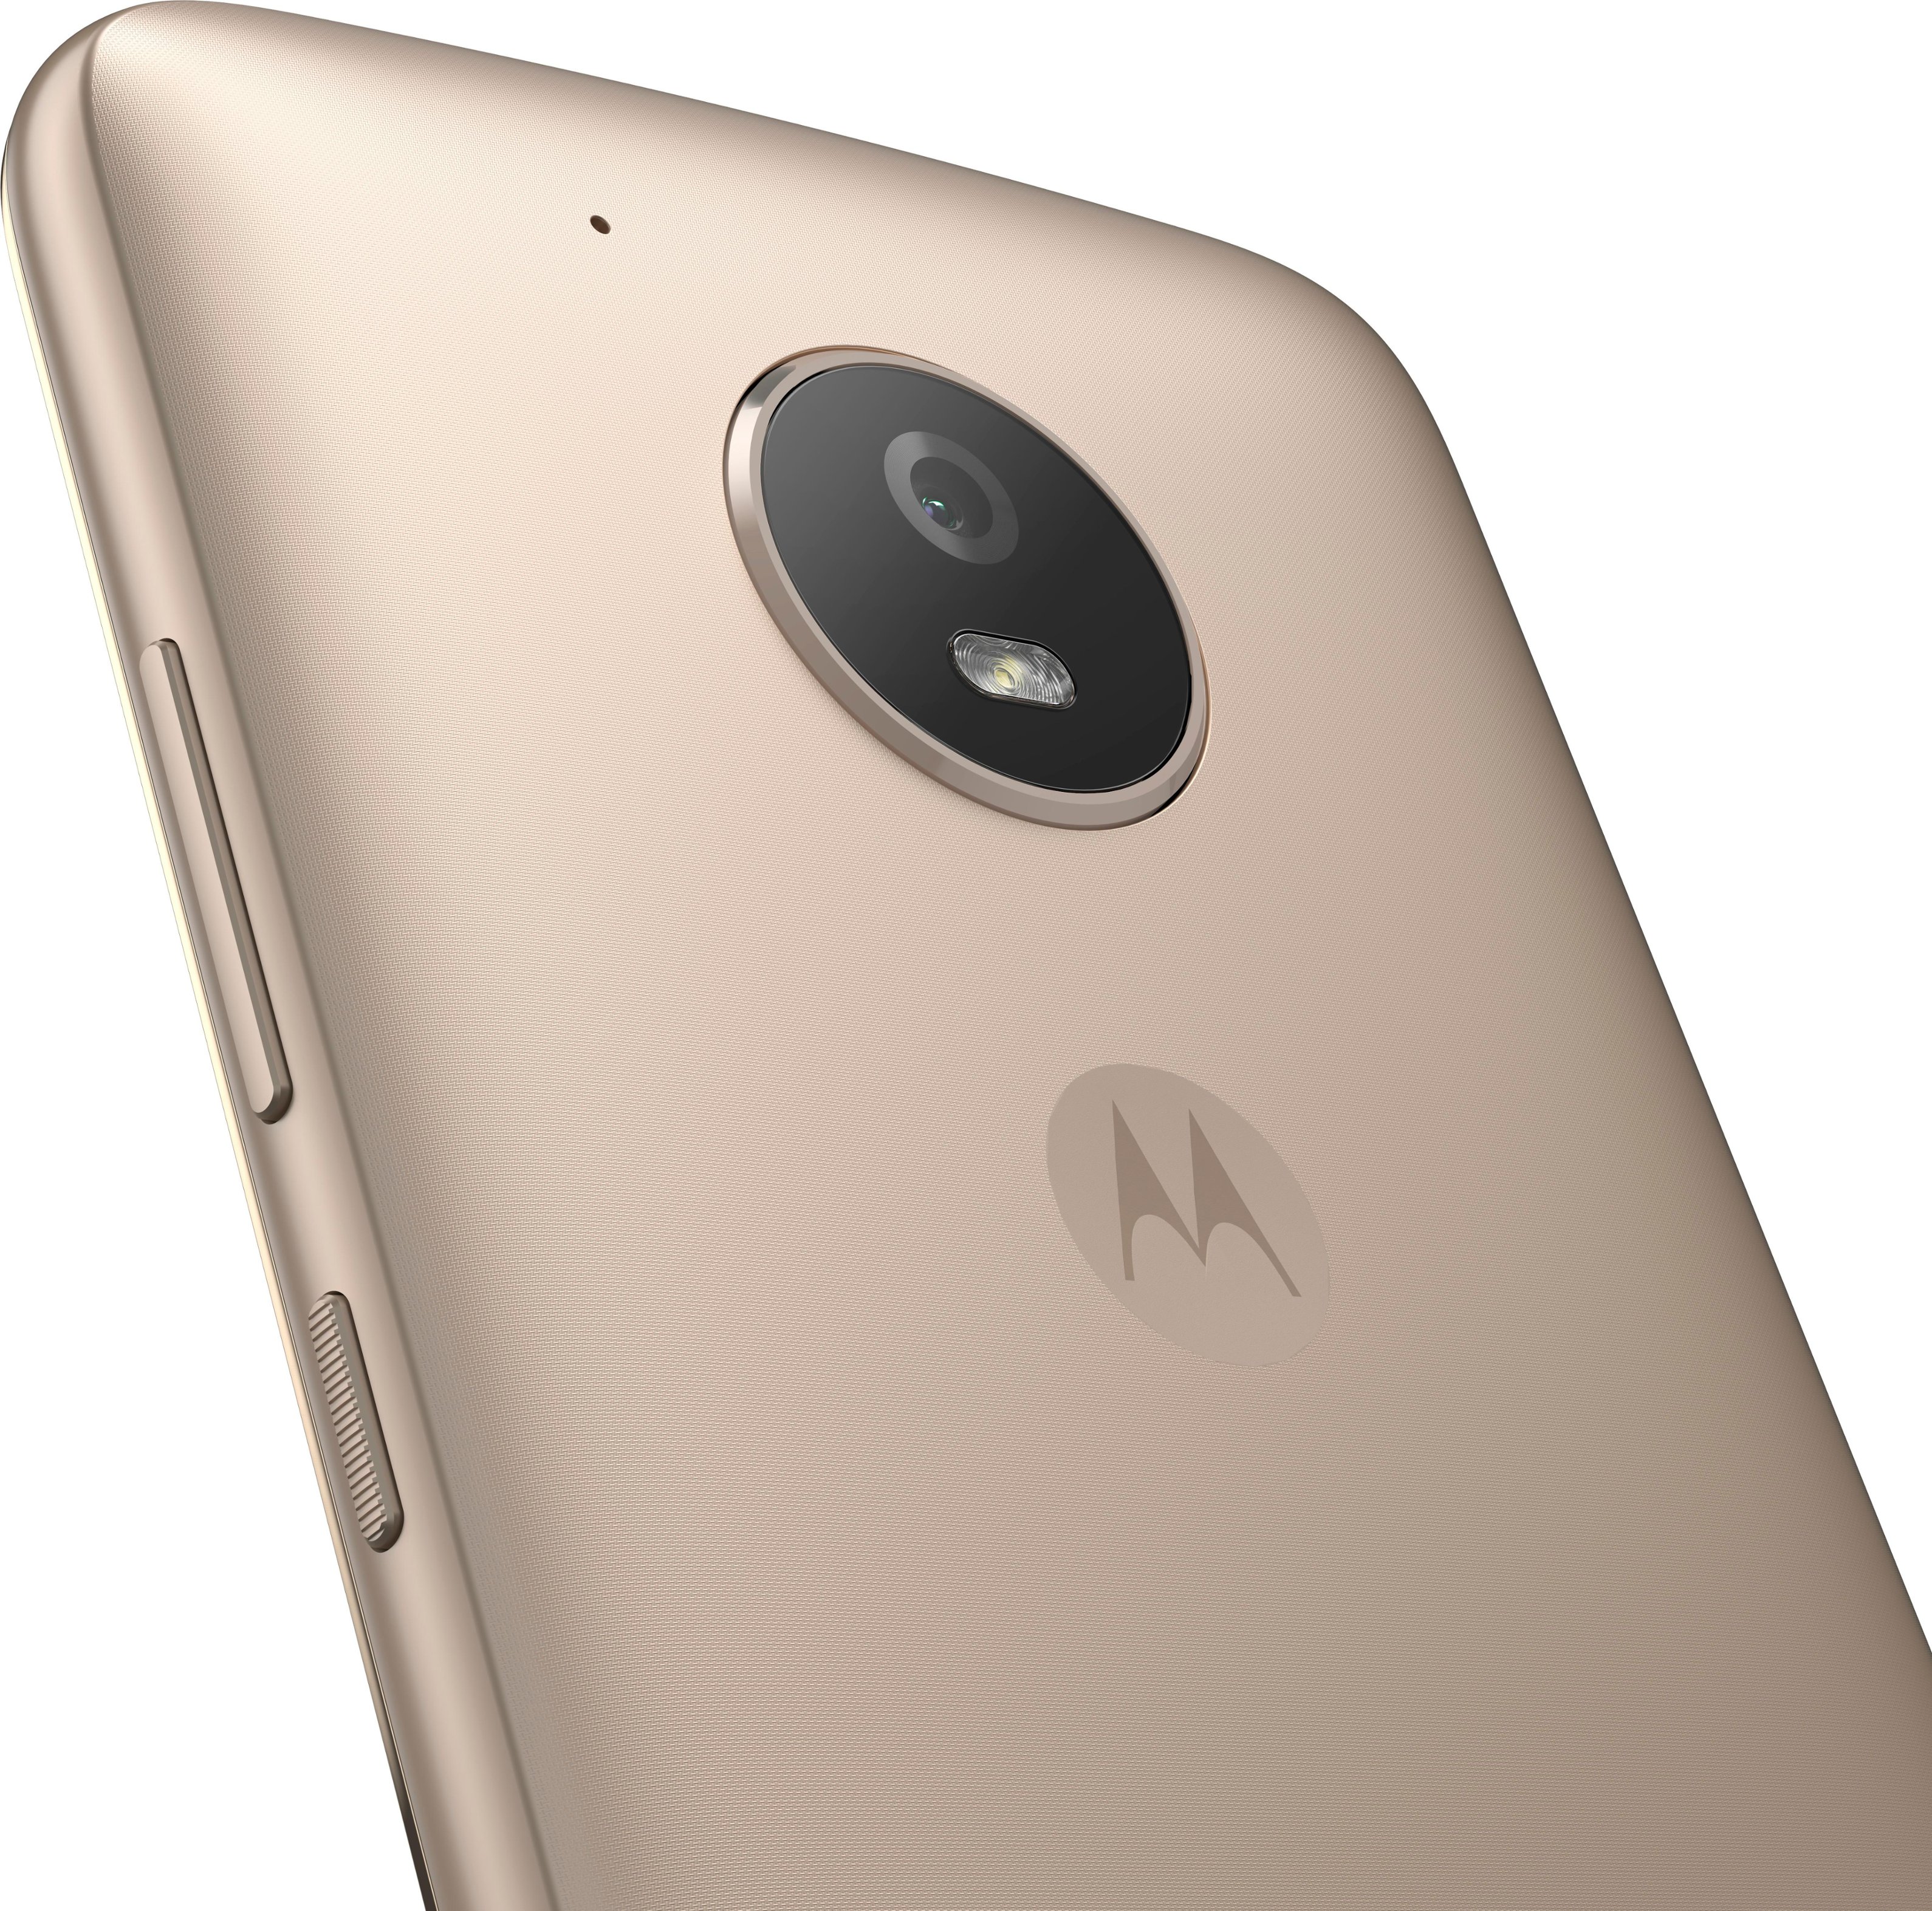 Questions and Answers: Motorola Moto E4 4G LTE with 16GB Memory Cell ...